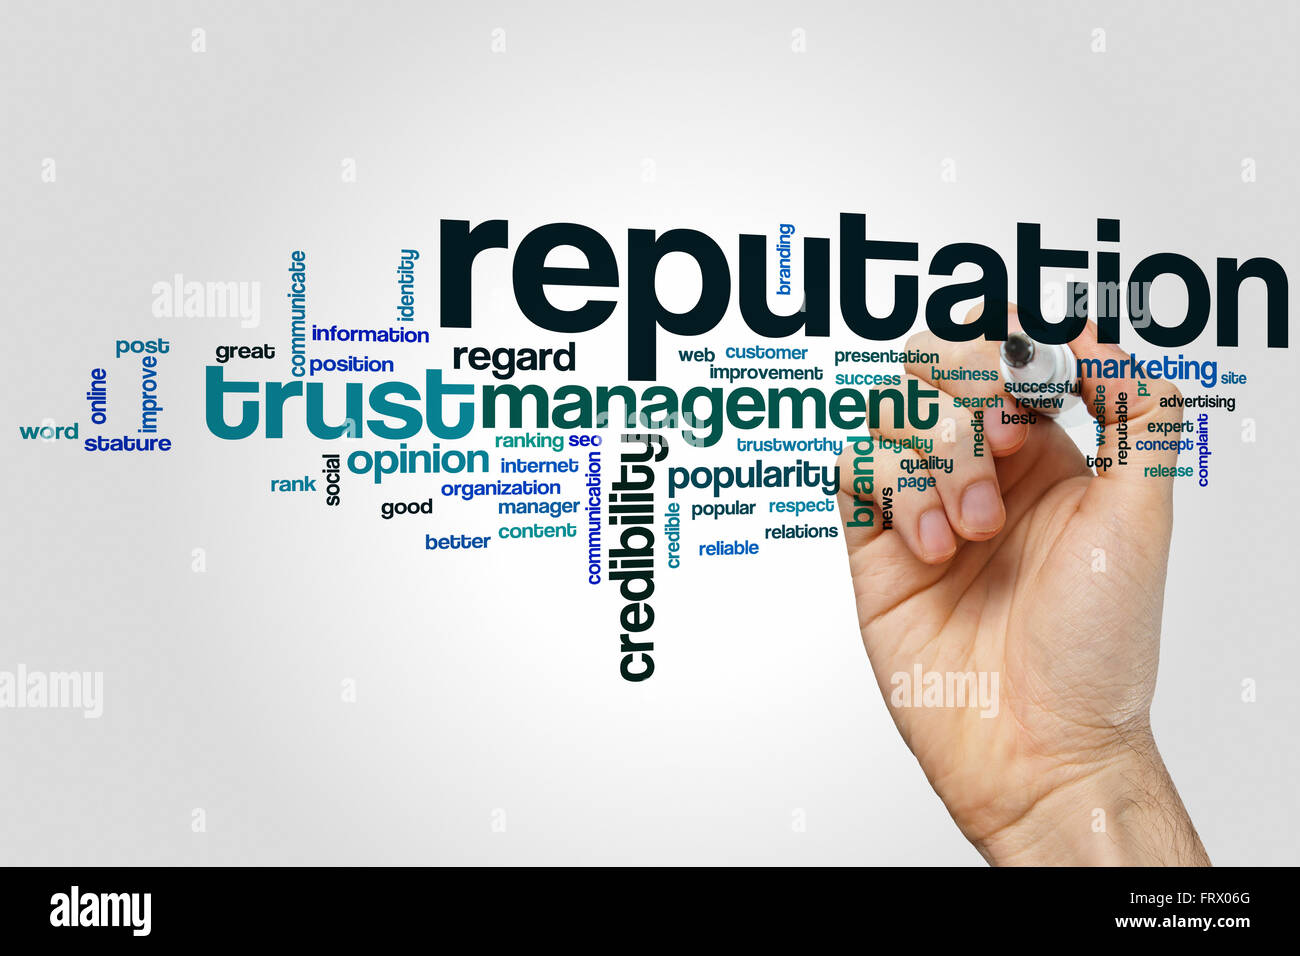 Reputation word cloud concept with crediblity brand related tags Stock Photo